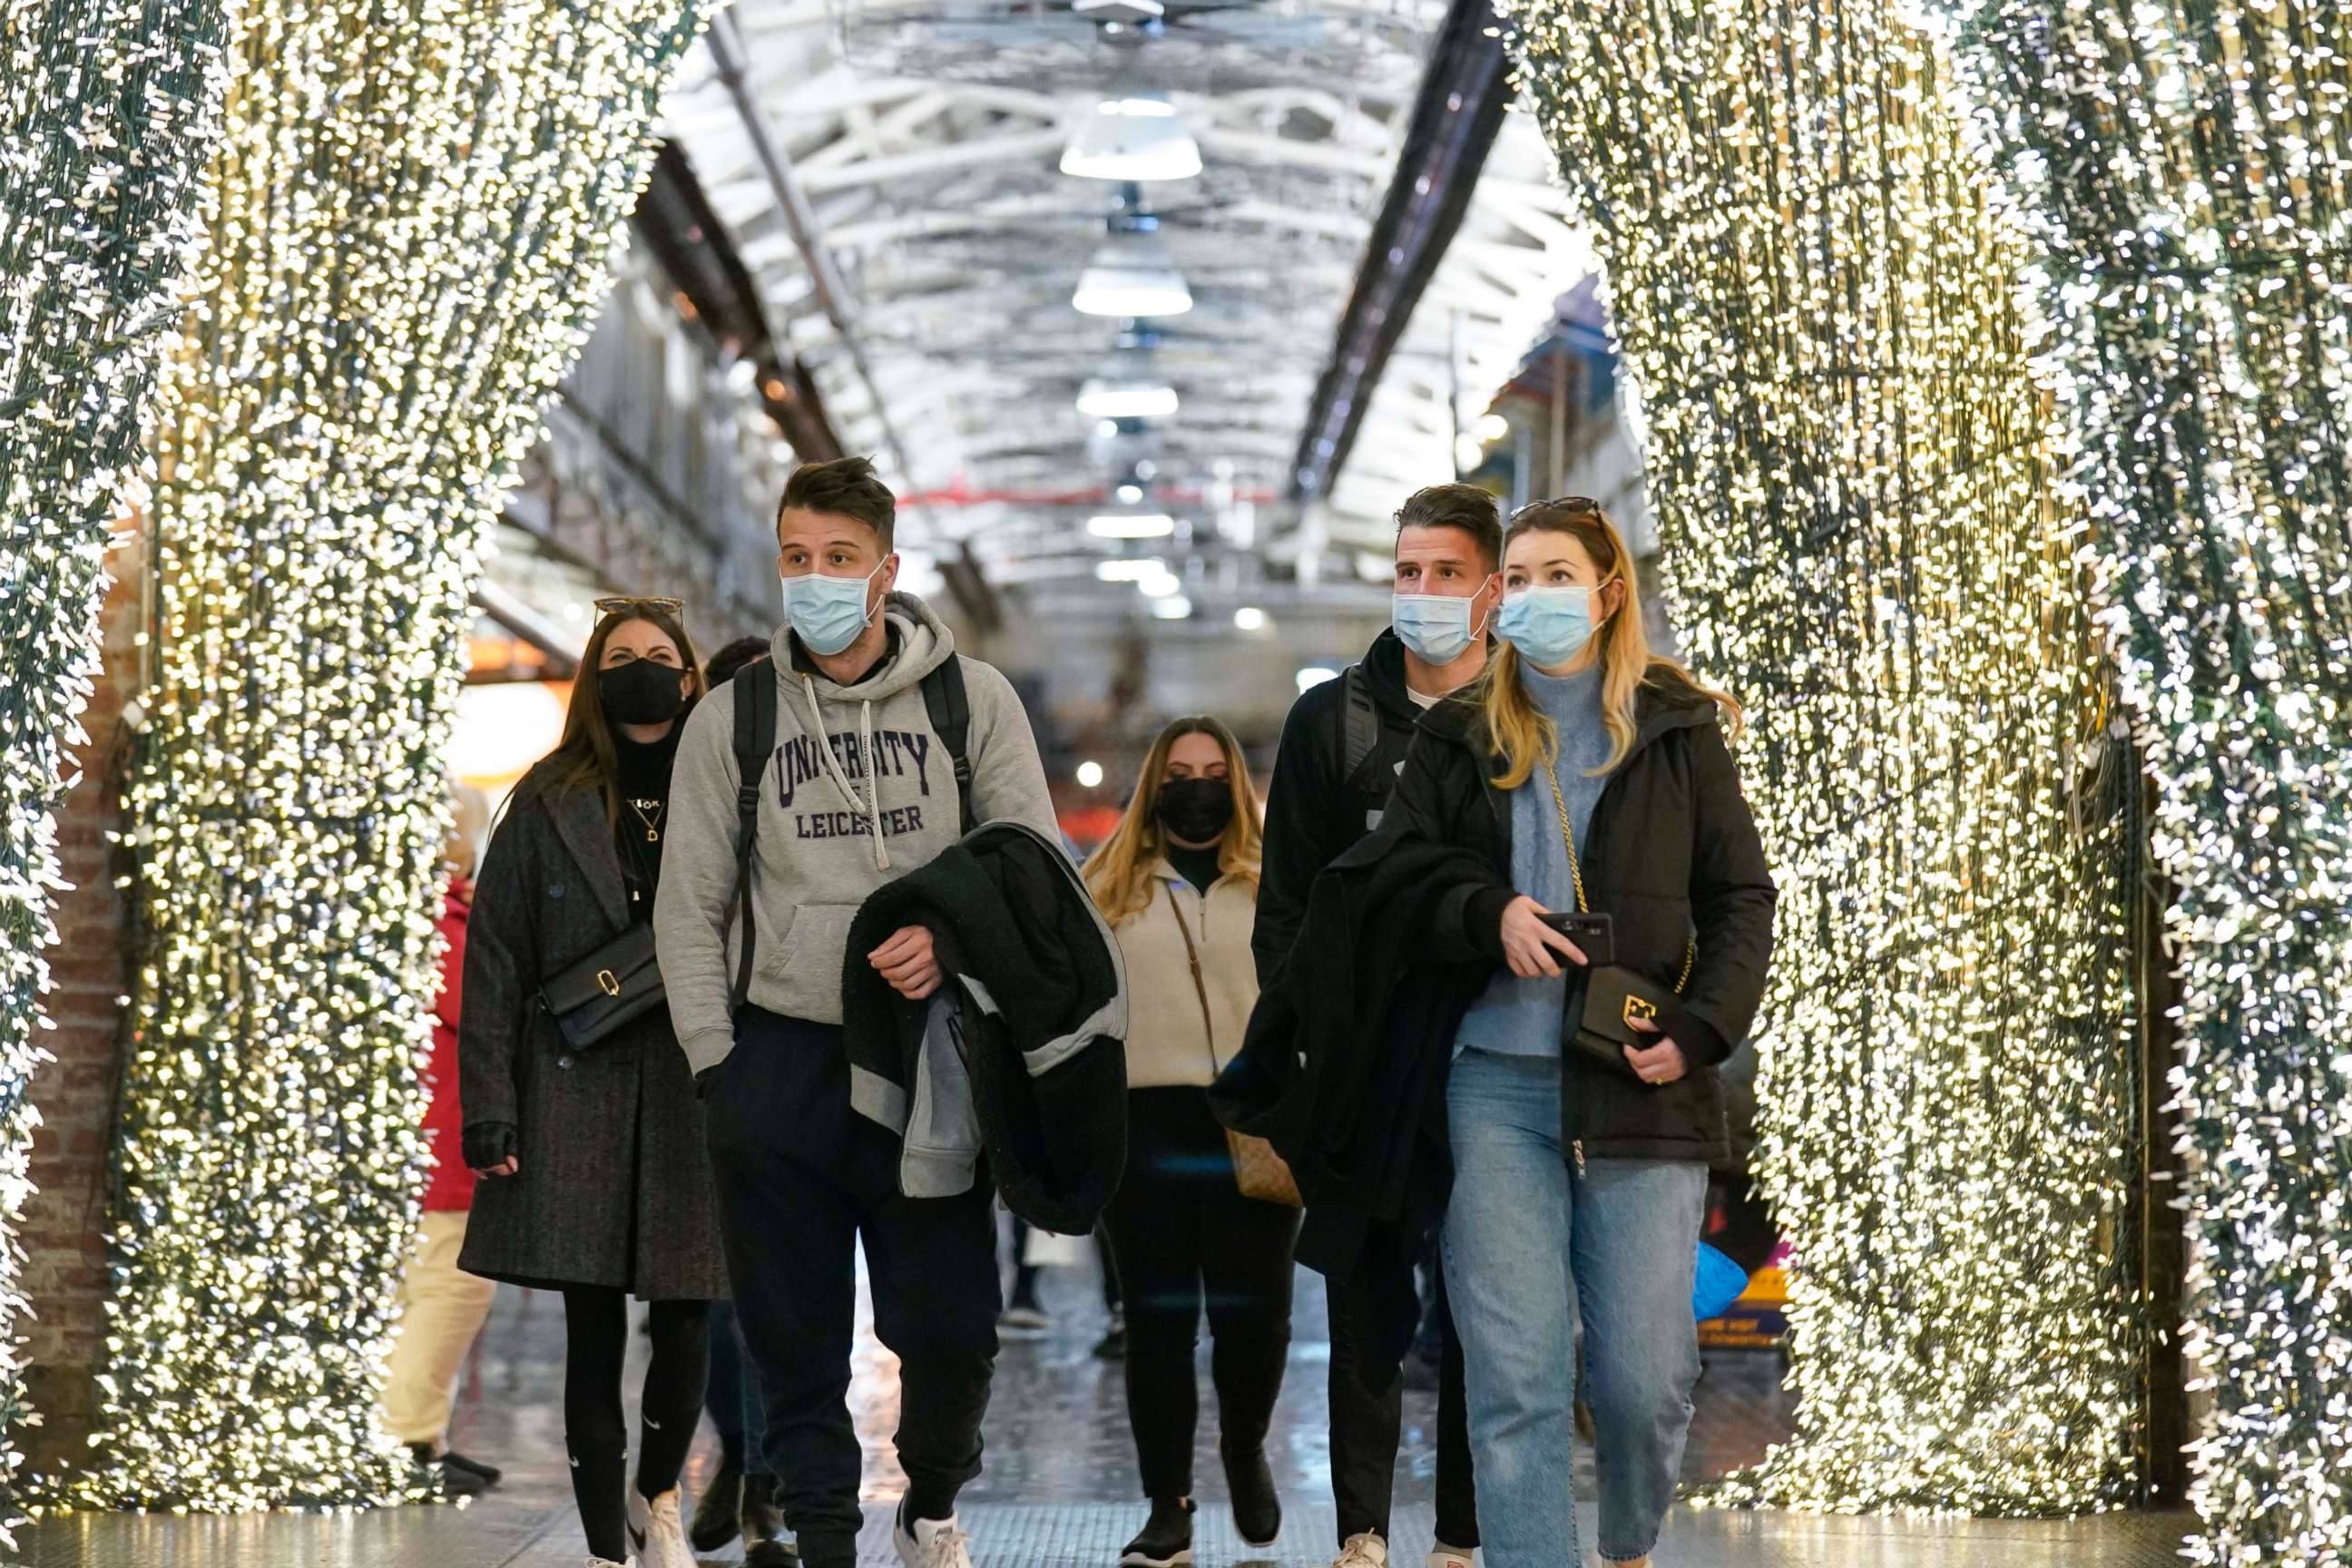 PHOTO: People wear masks while walking through an indoor shopping area in New York, Feb. 9, 2022.